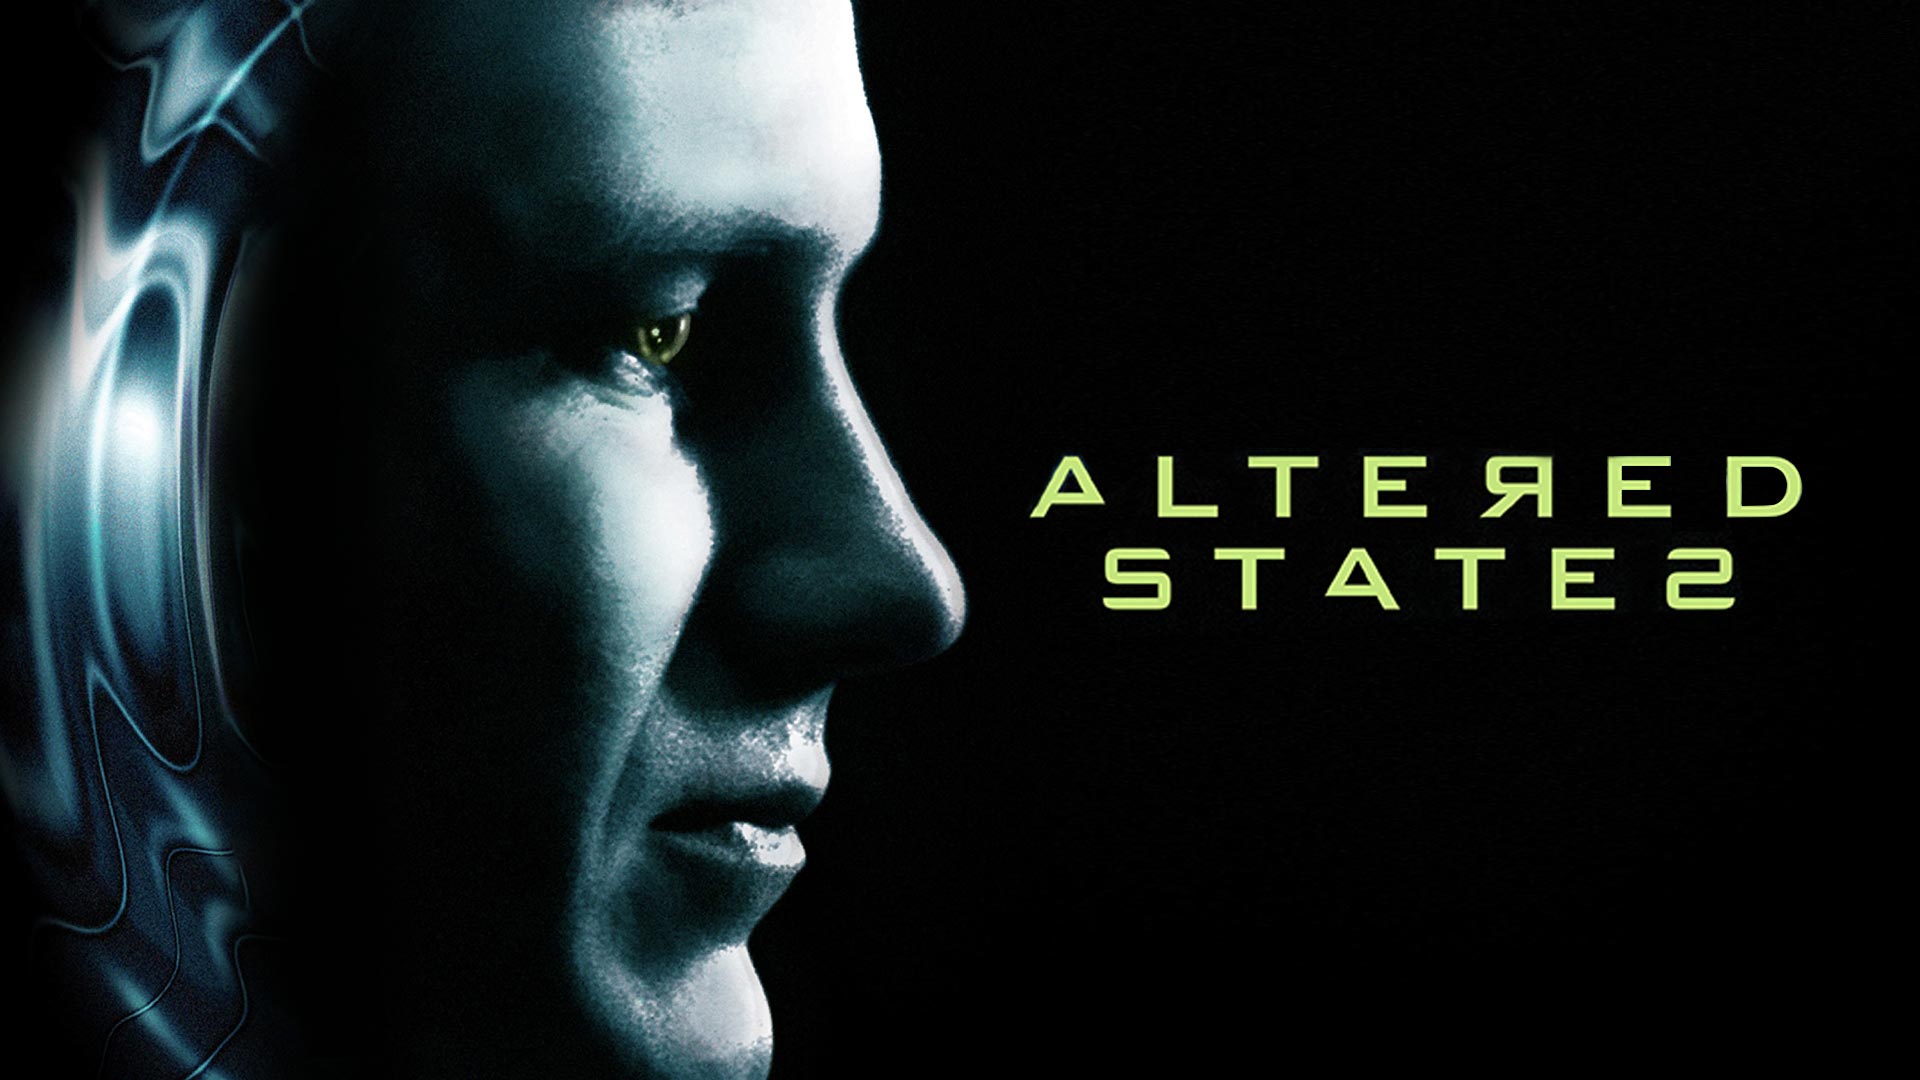 39-facts-about-the-movie-altered-states